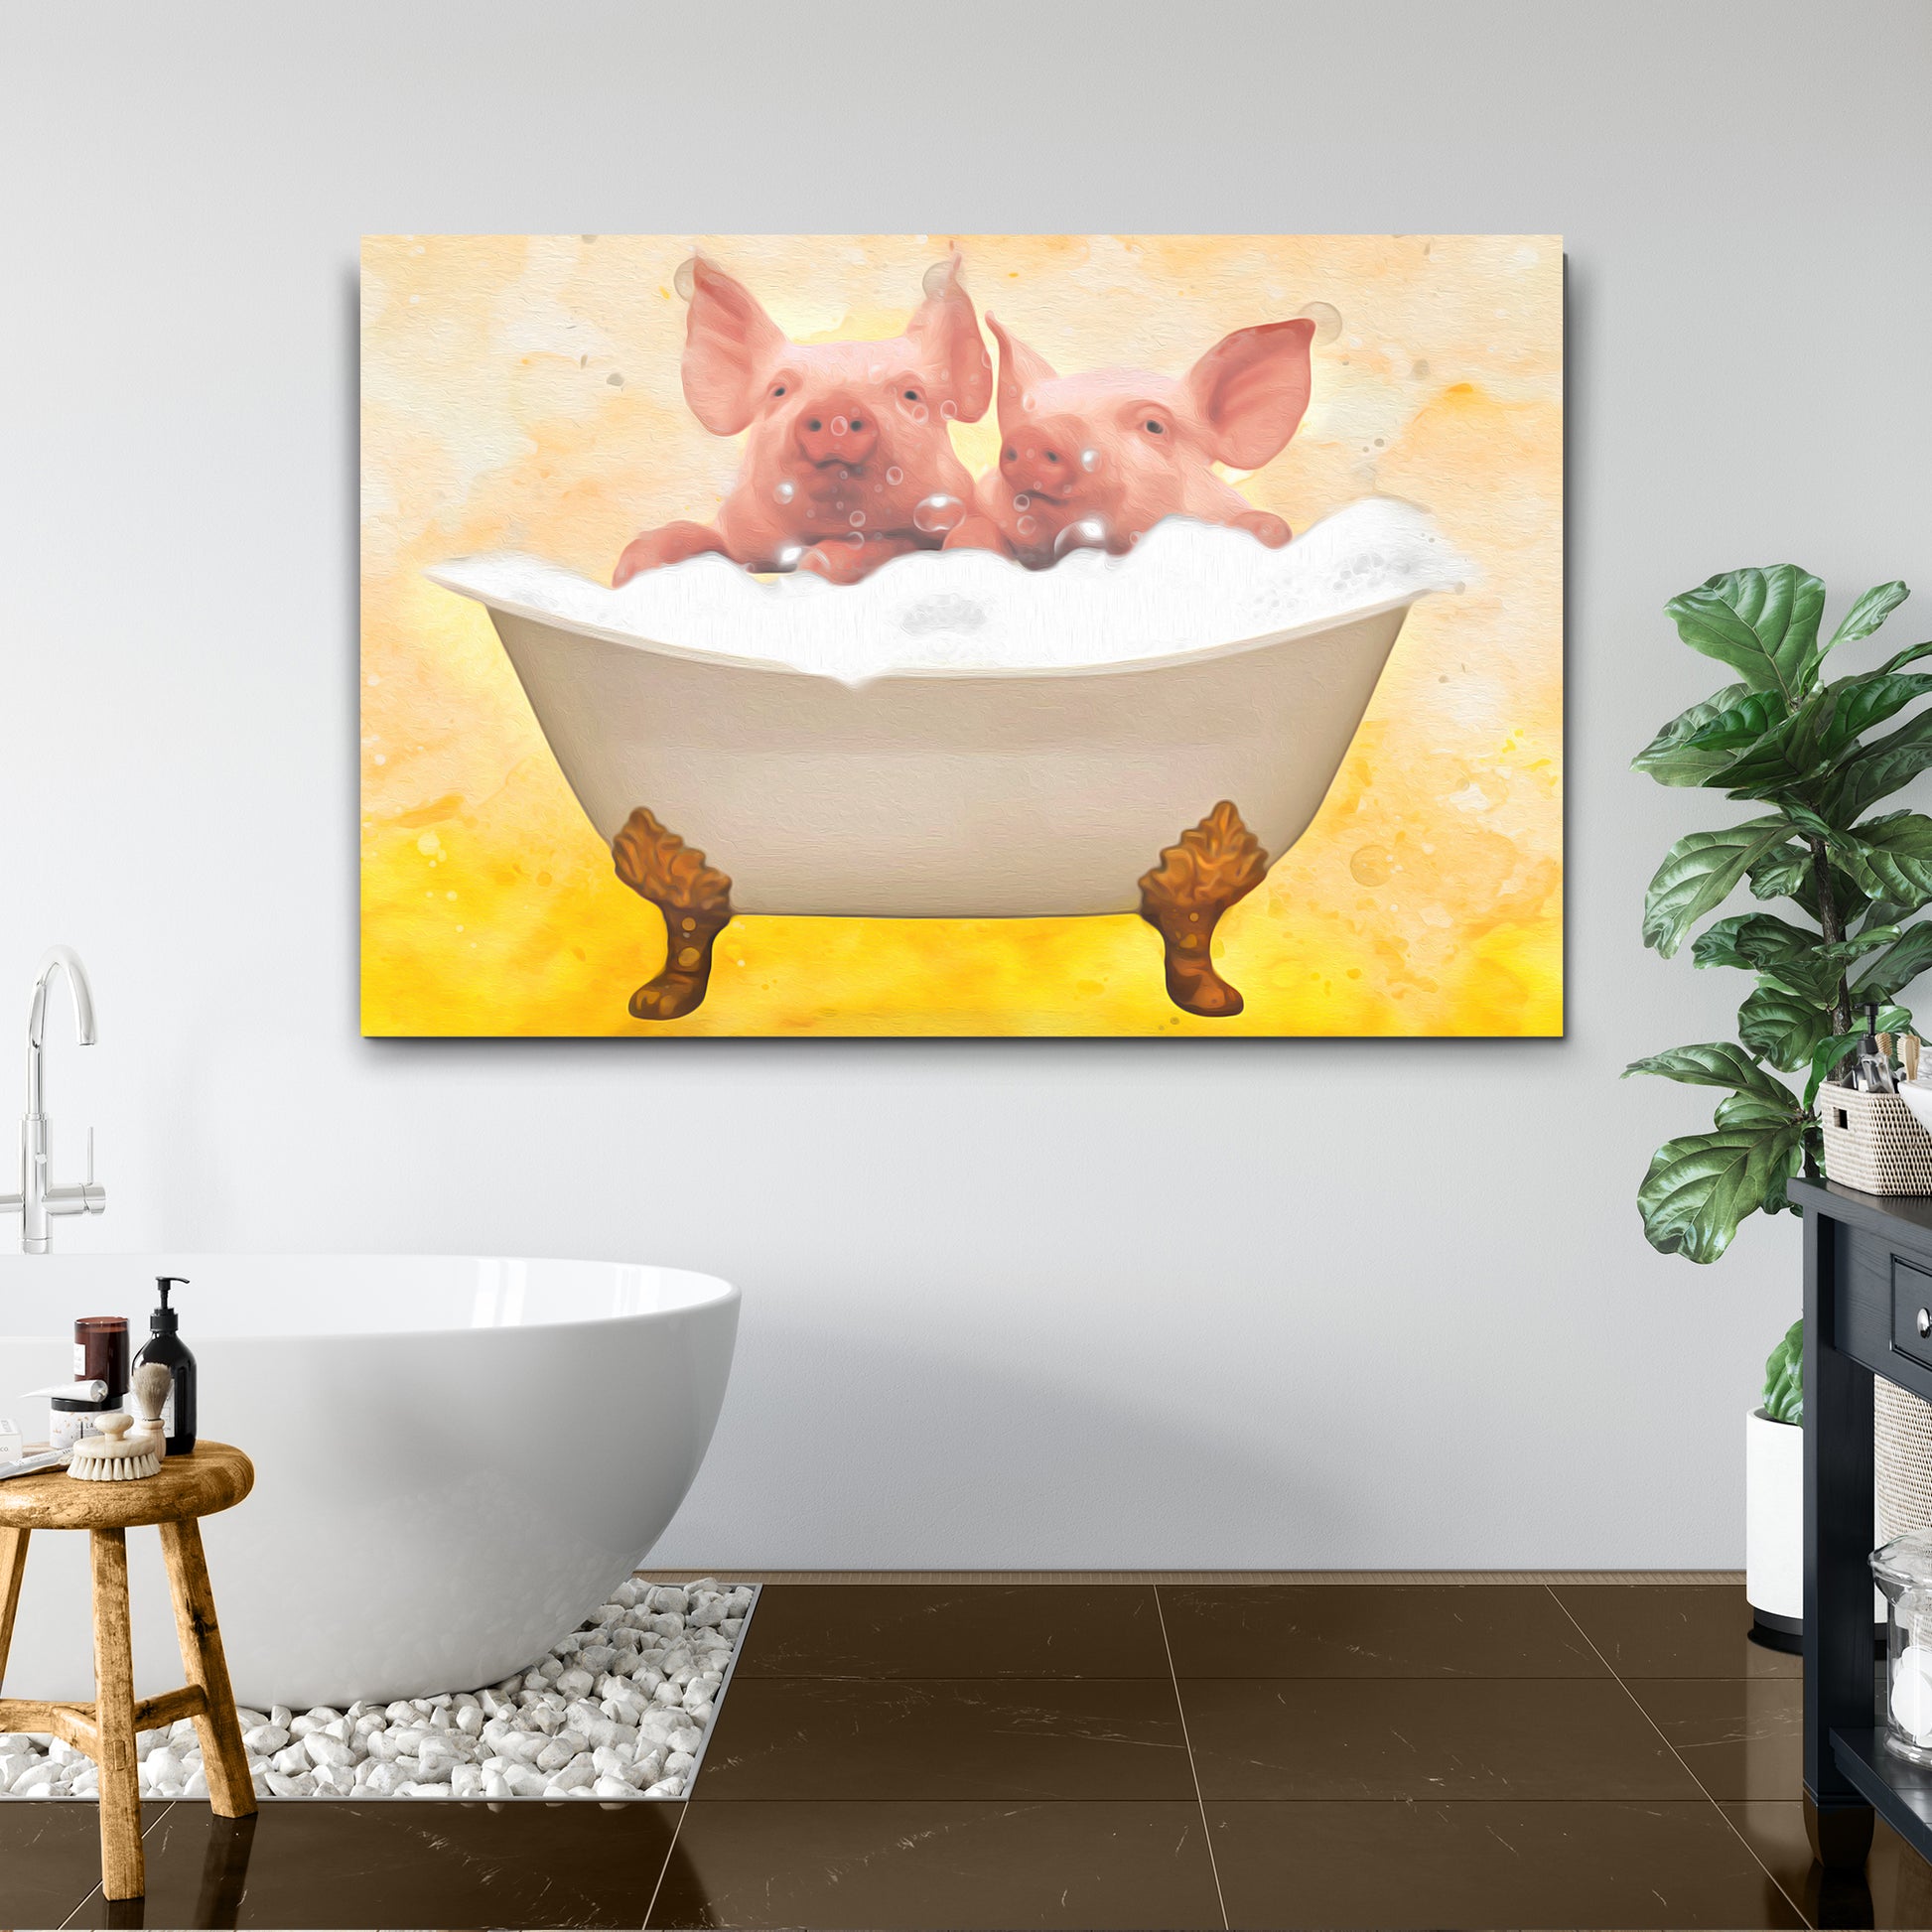 Bath Pig Buddies Canvas Wall Art - Image by Tailored Canvases